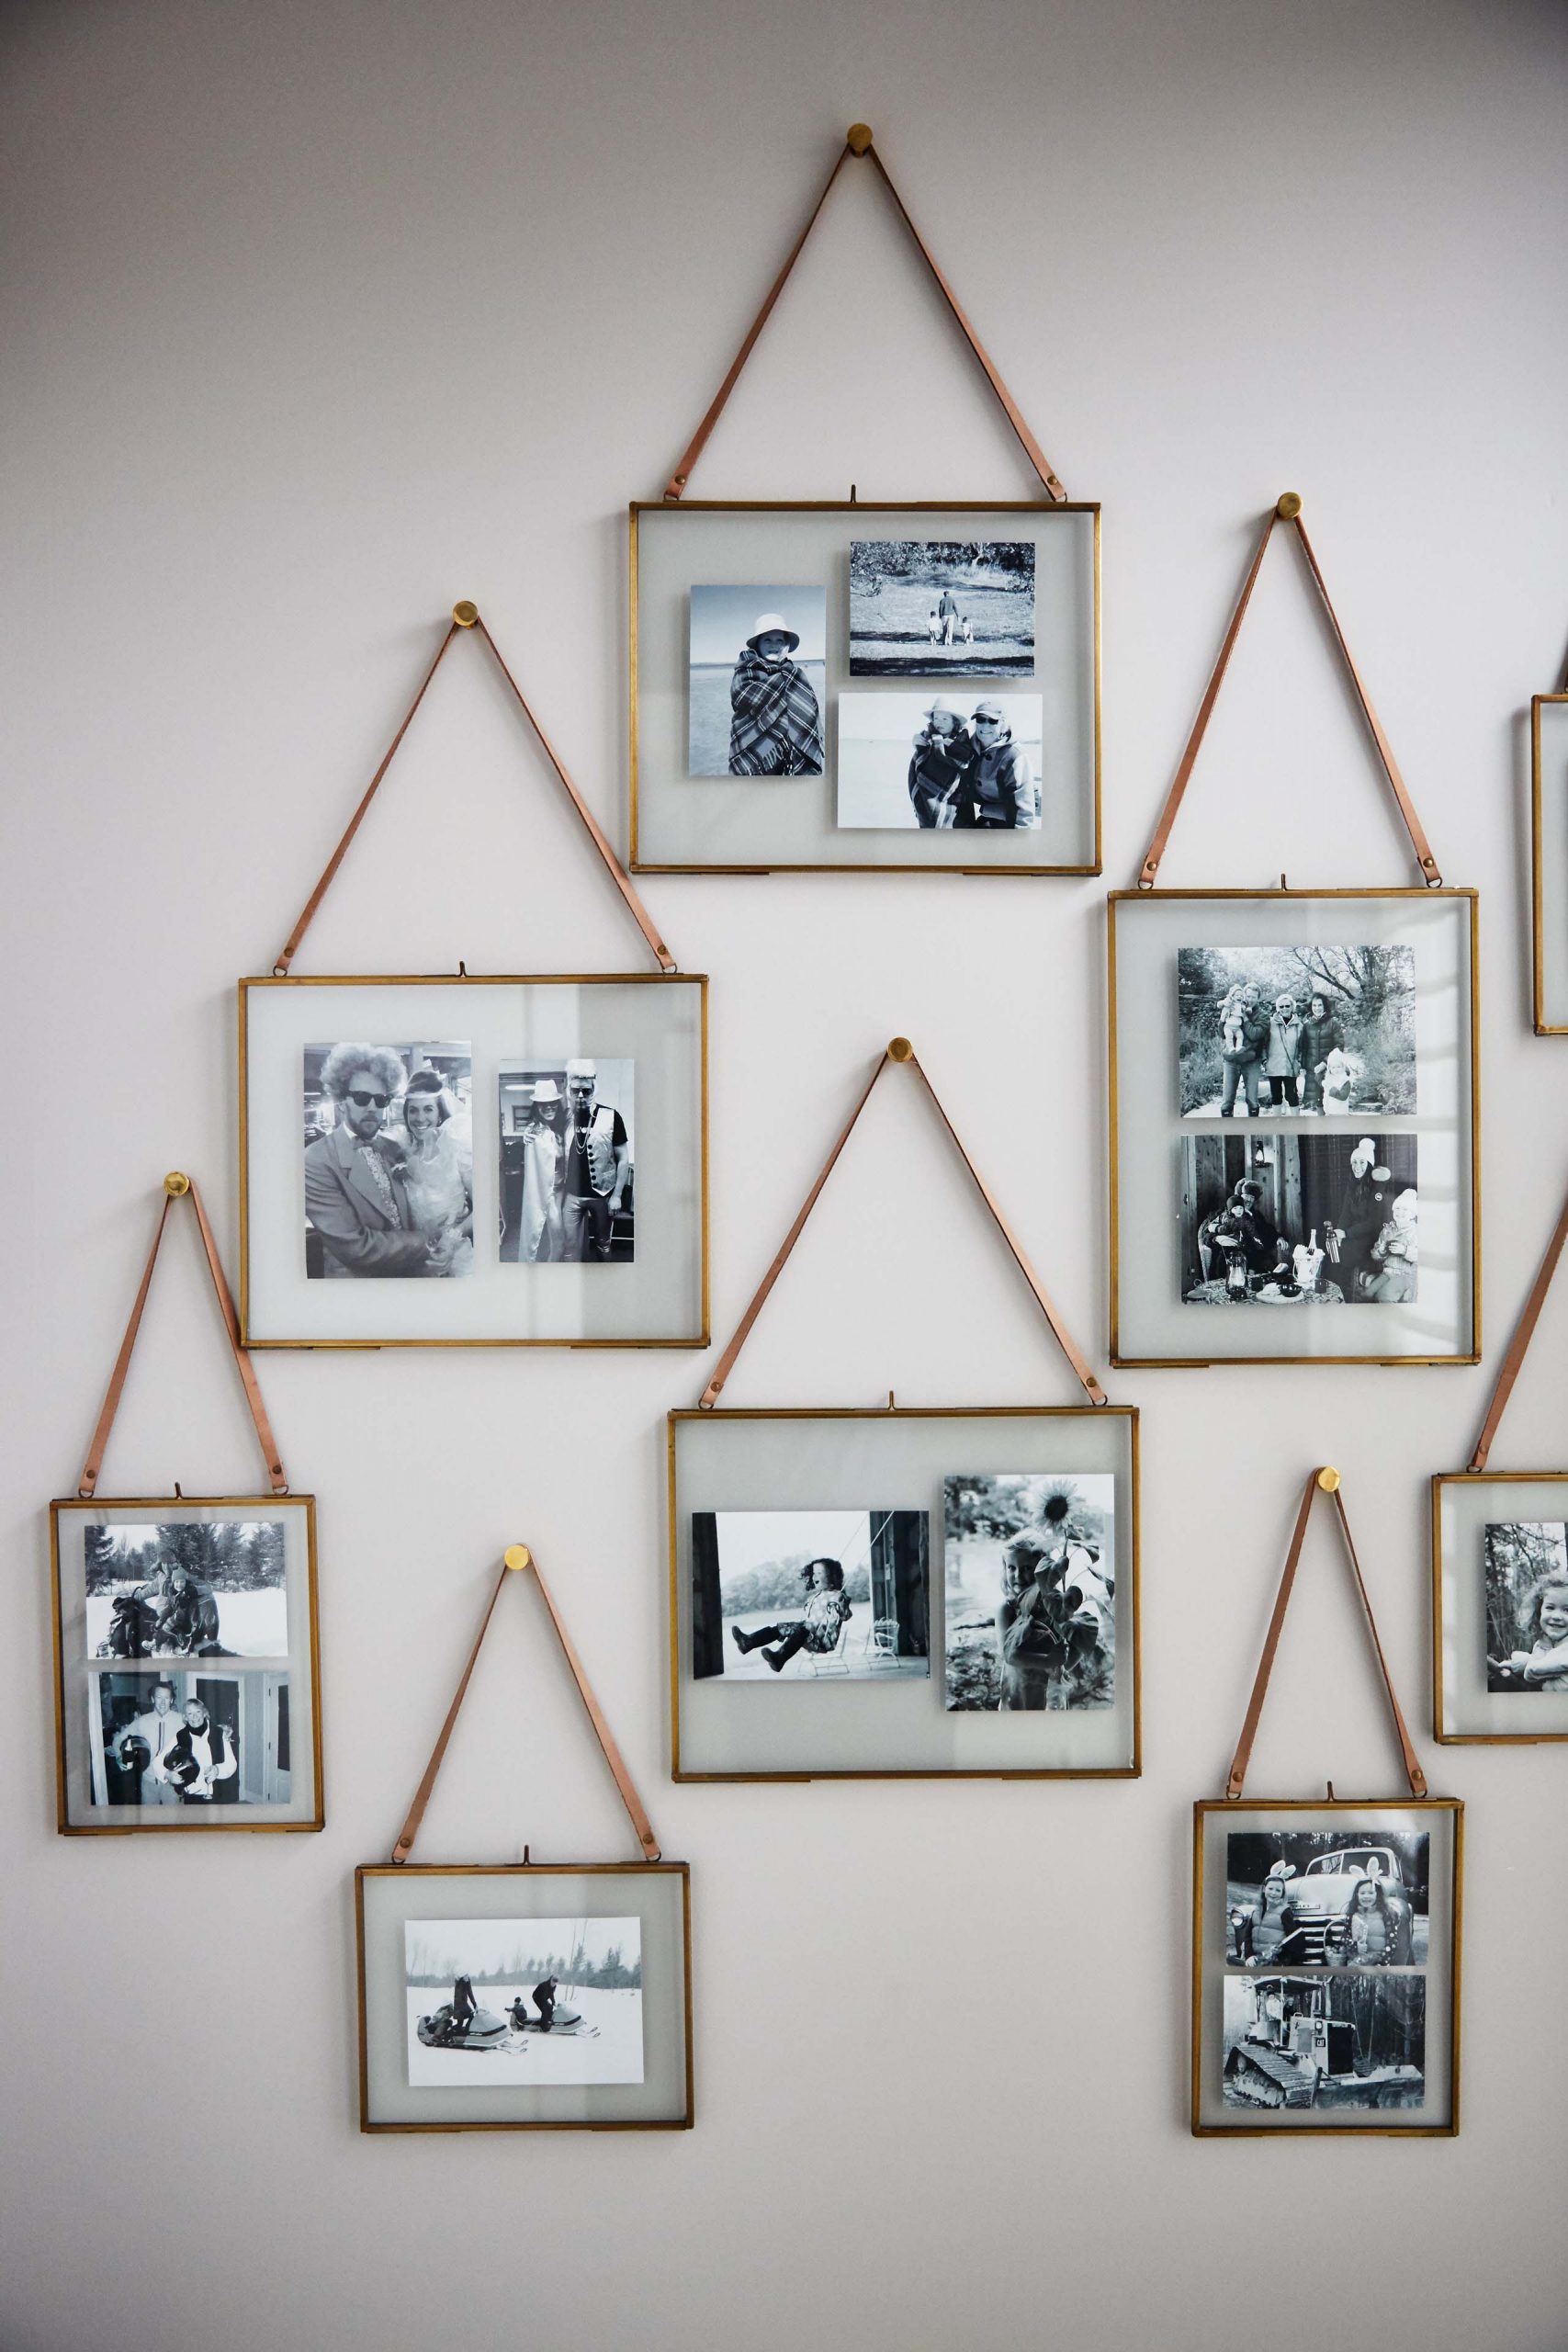 Gallery walls and photos displays should be constantly evolving in family homes.